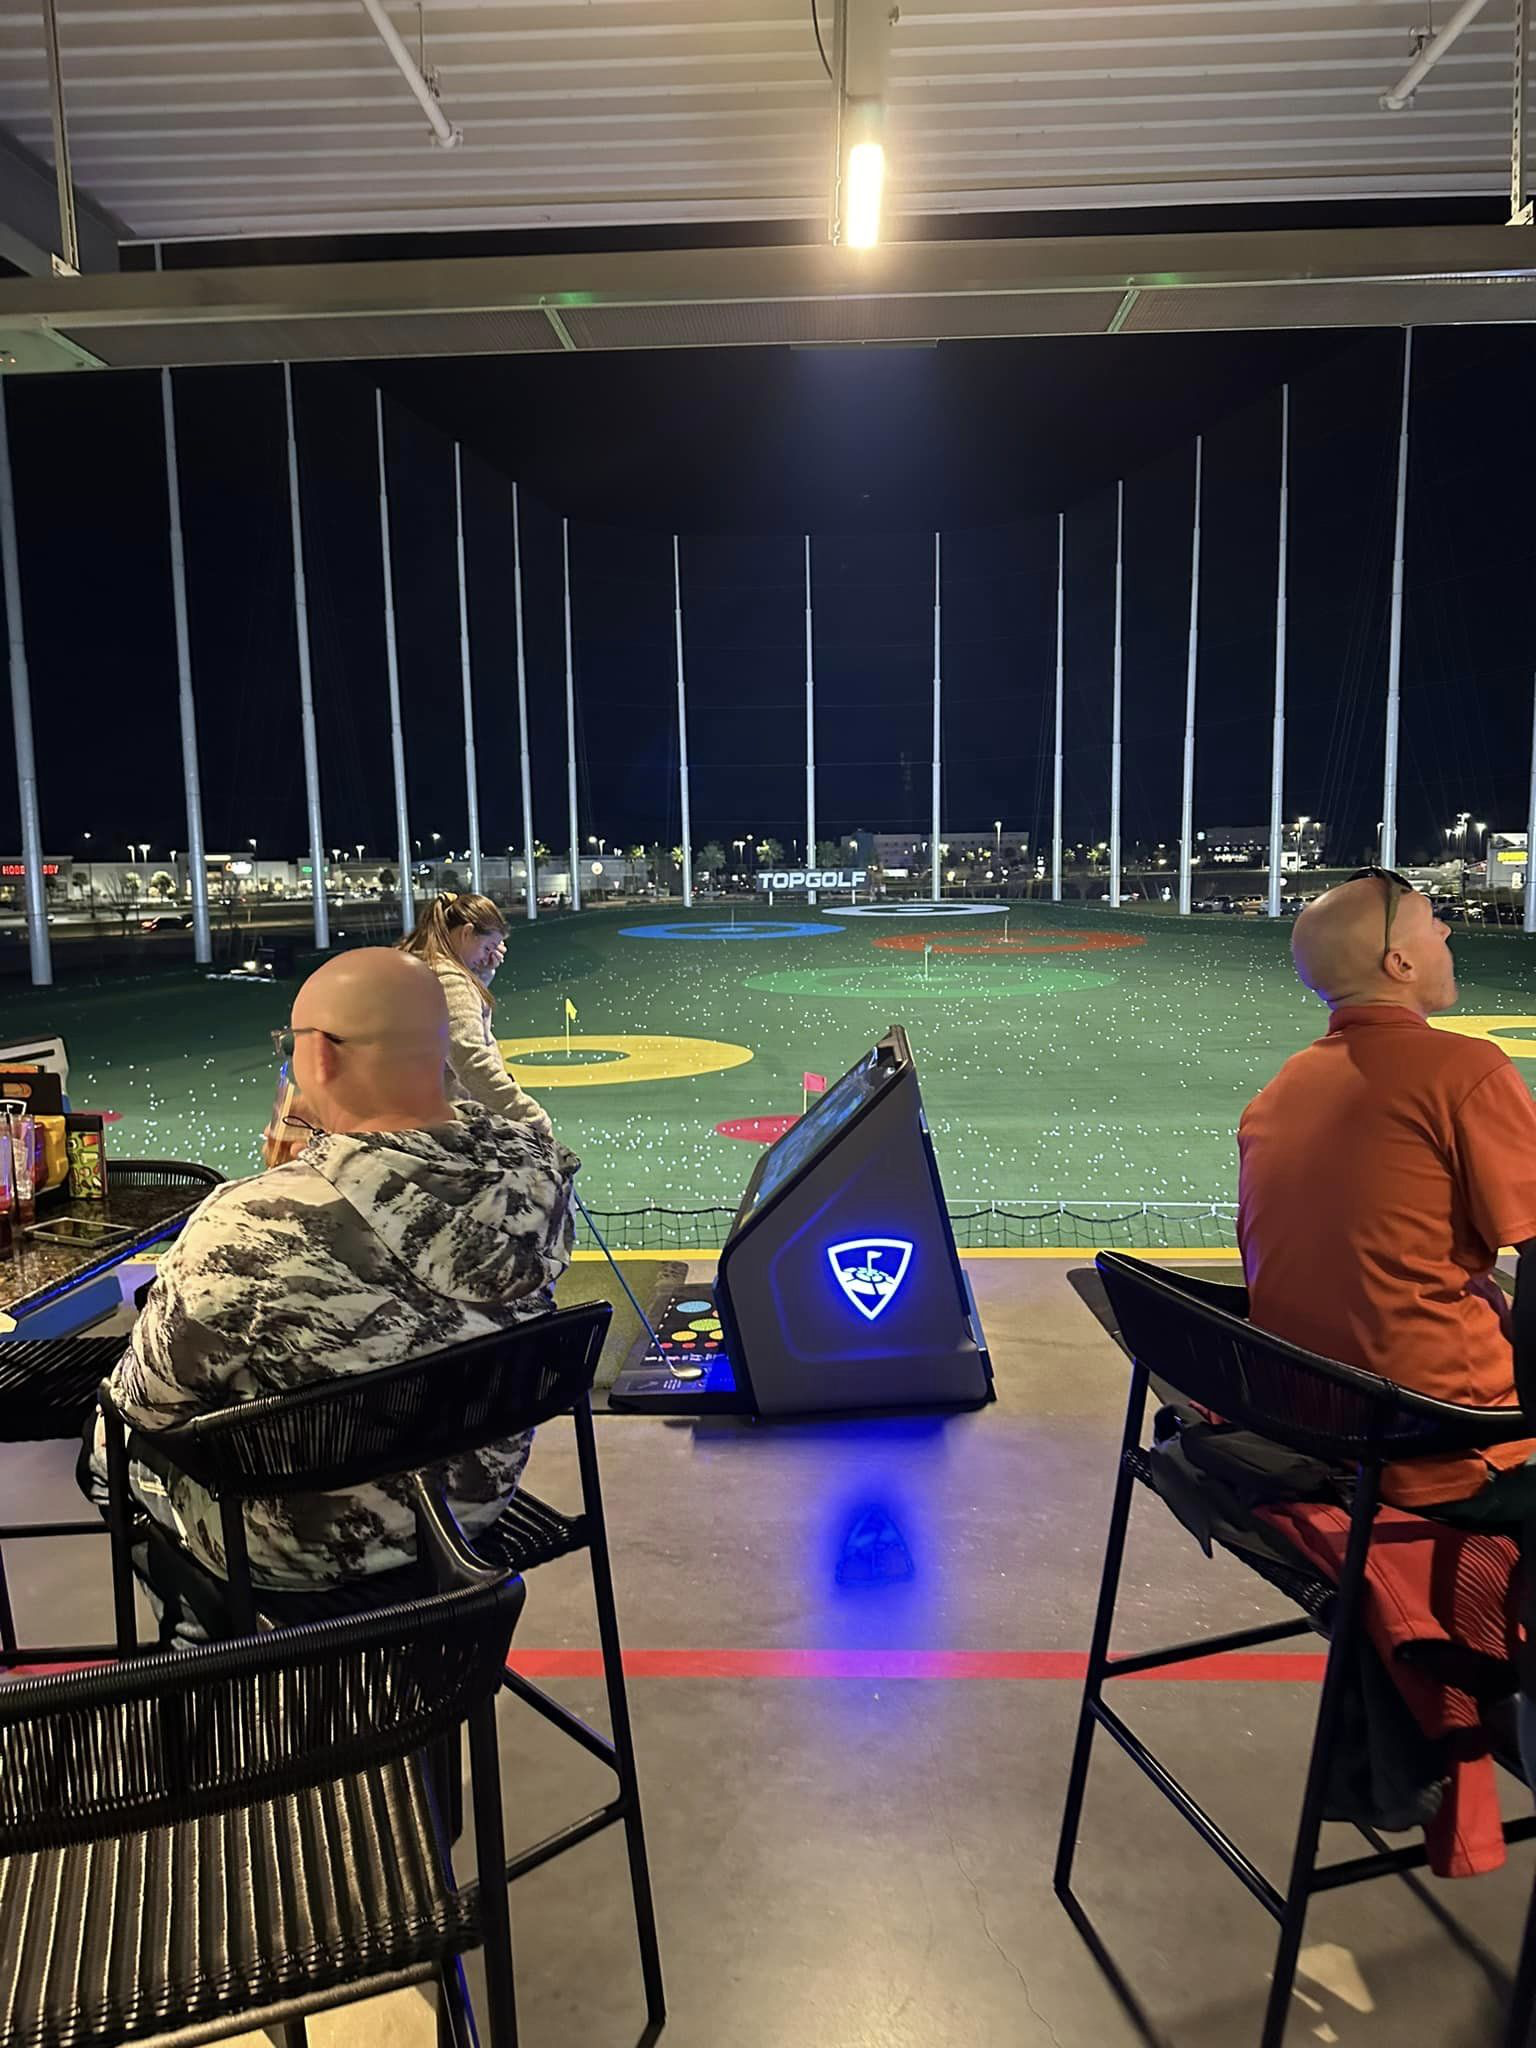 Unwrapping joy and swinging into the festive spirit at our Topgolf Office Christmas bash!